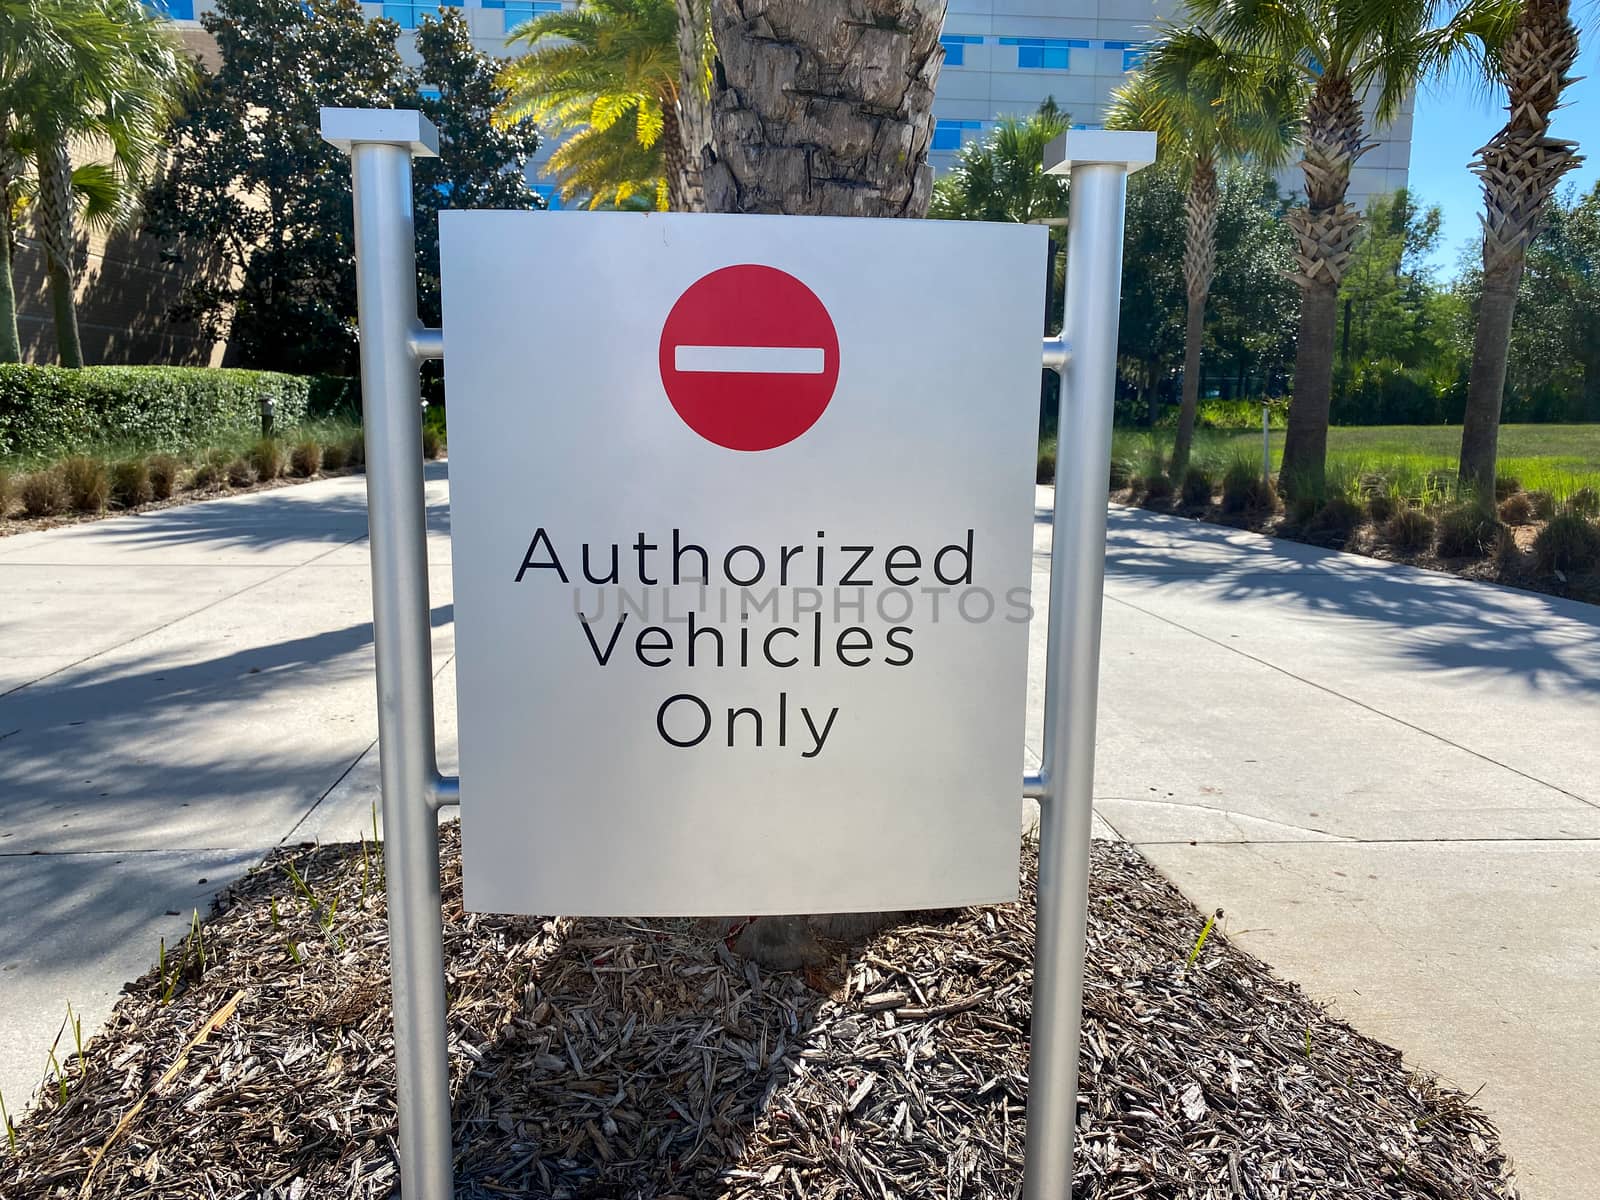 A warning sign that reads "Authorized Vehcles Only" by Jshanebutt